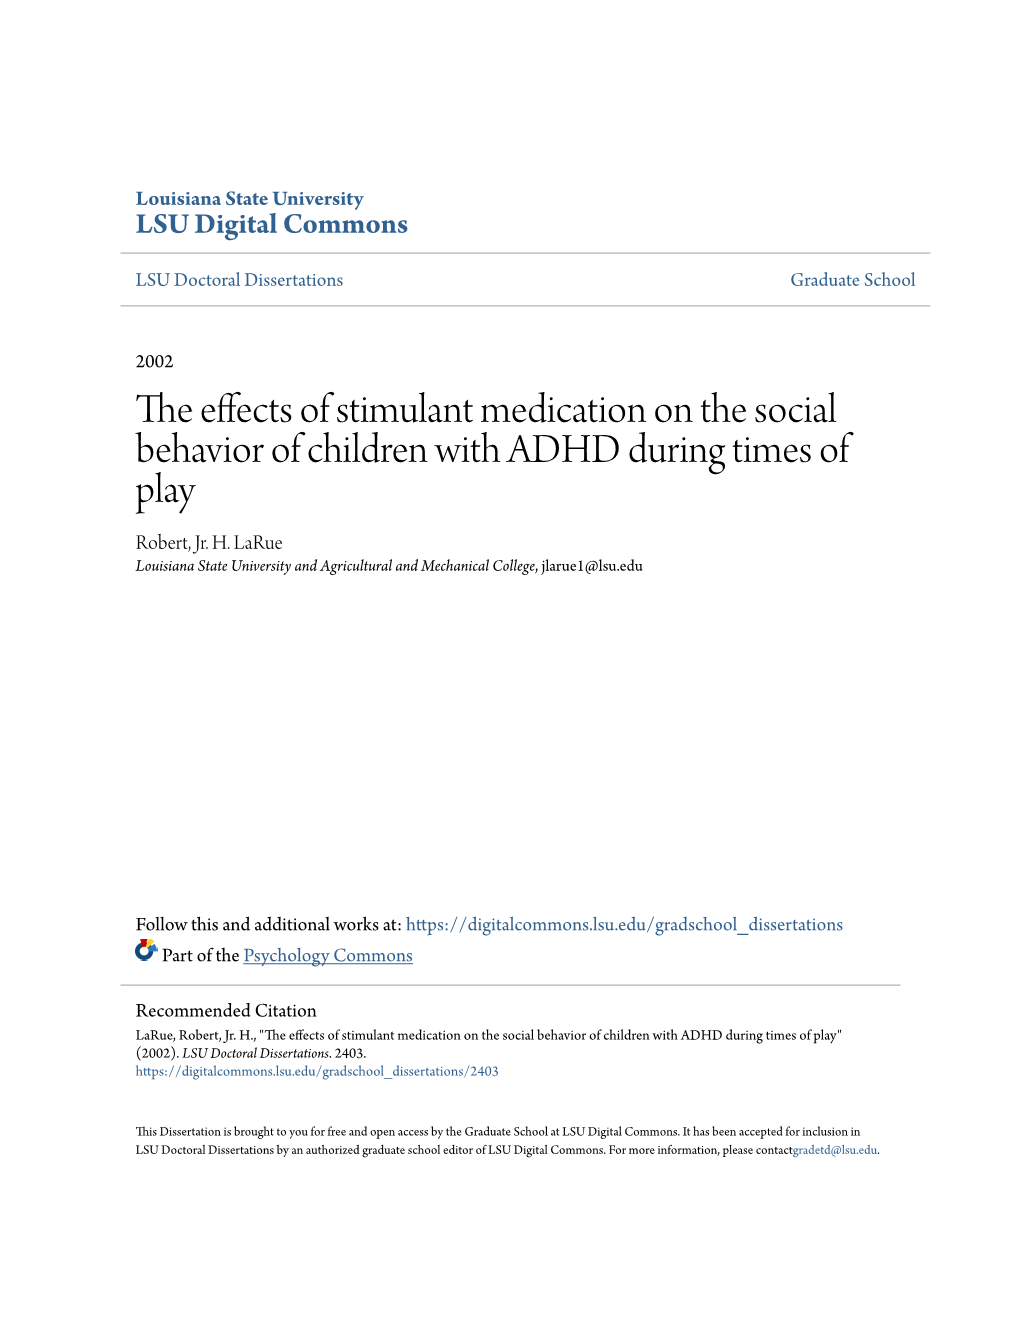 The Effects of Stimulant Medication on the Social Behavior of Children with ADHD During Times of Play Robert, Jr